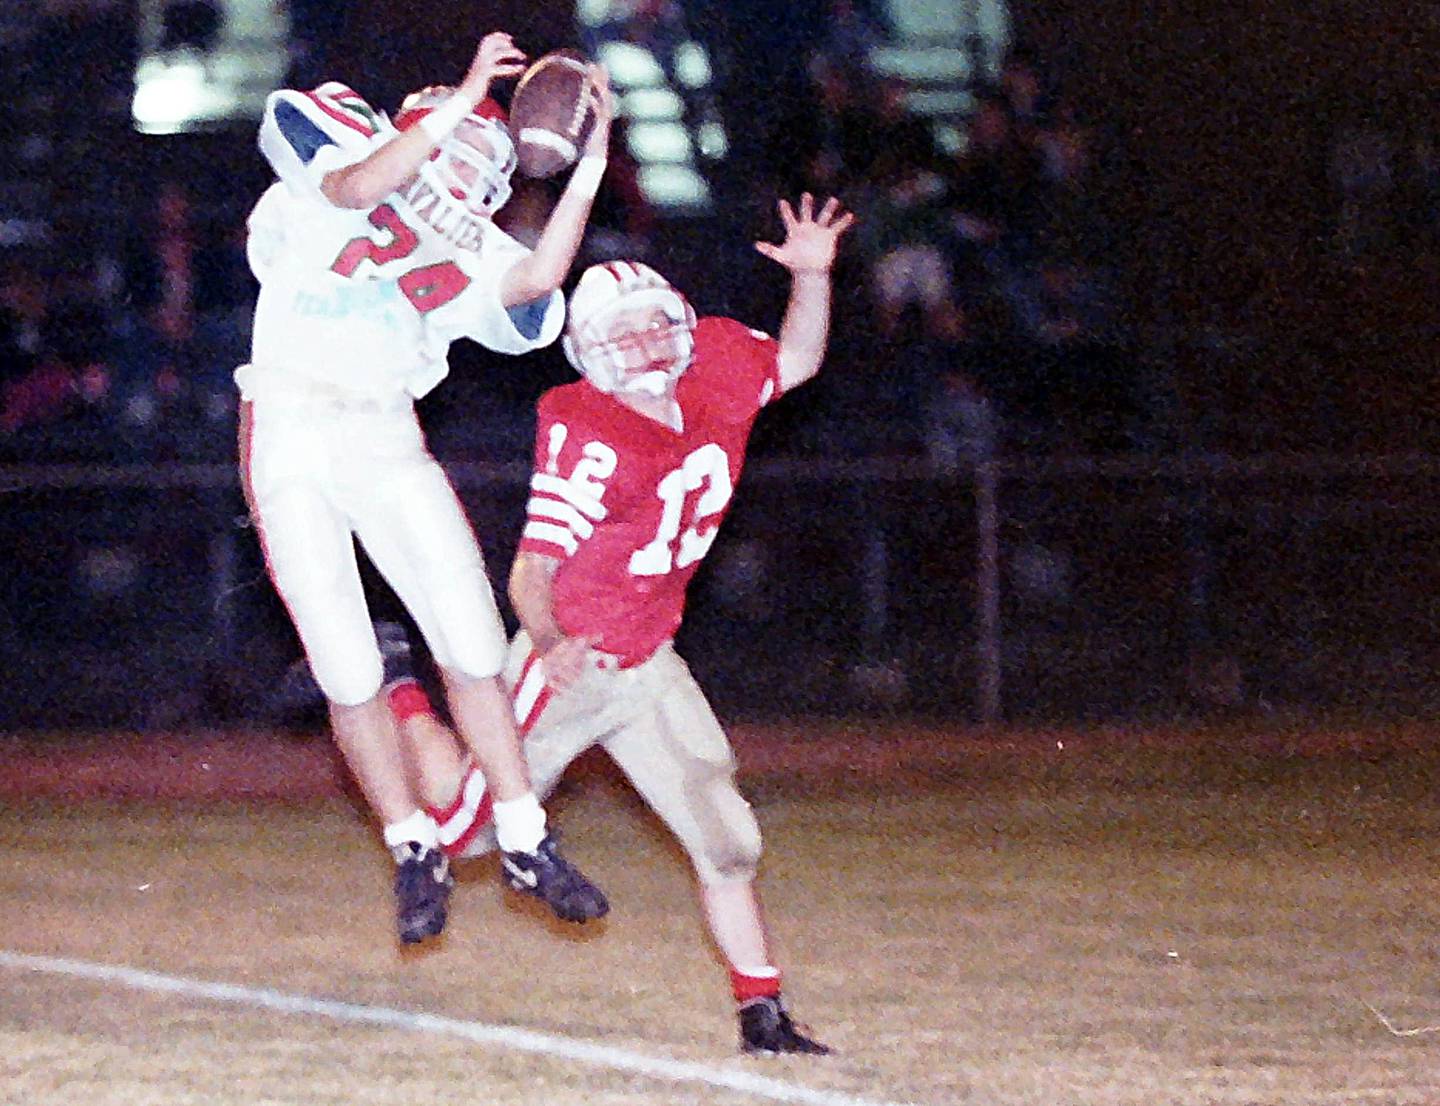 La Salle-Peru's Paul Williams makes a leaping catch in front of Ottawa's Mike Hollenbeck on Friday, Oct. 23, 1992 at King Field in Ottawa.